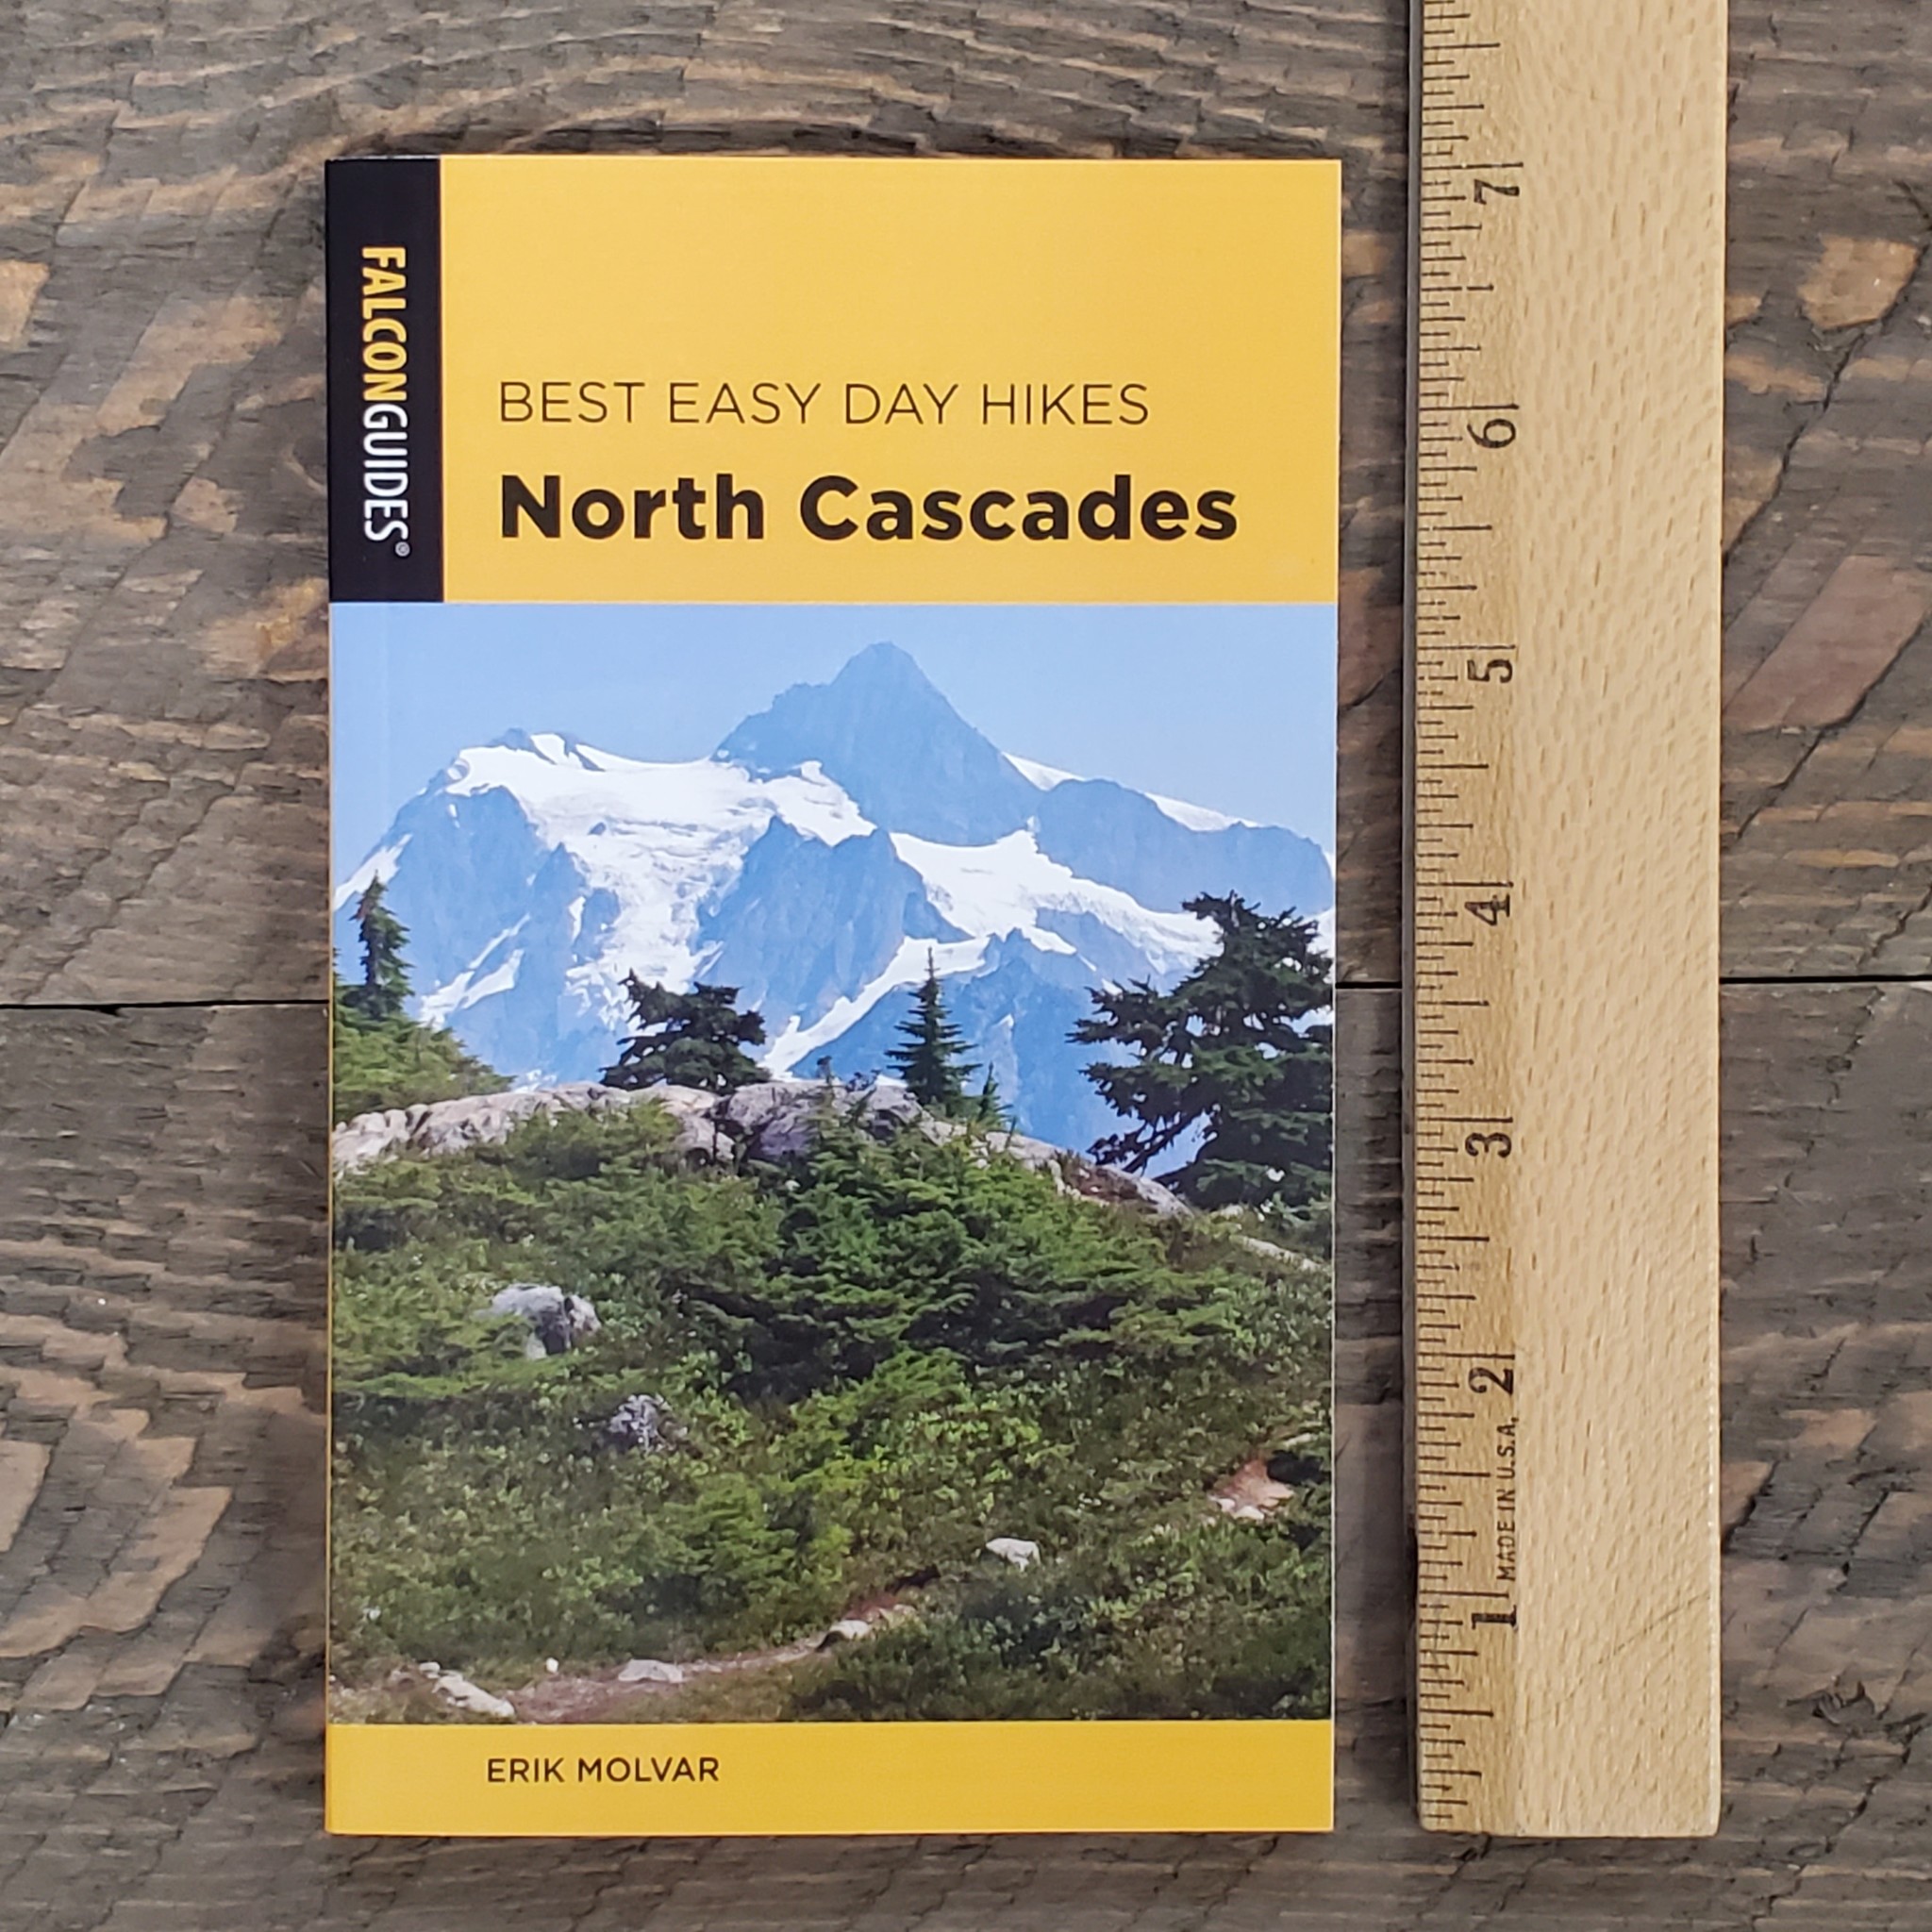 Best Easy Day Hikes North Cascades 3rd ed